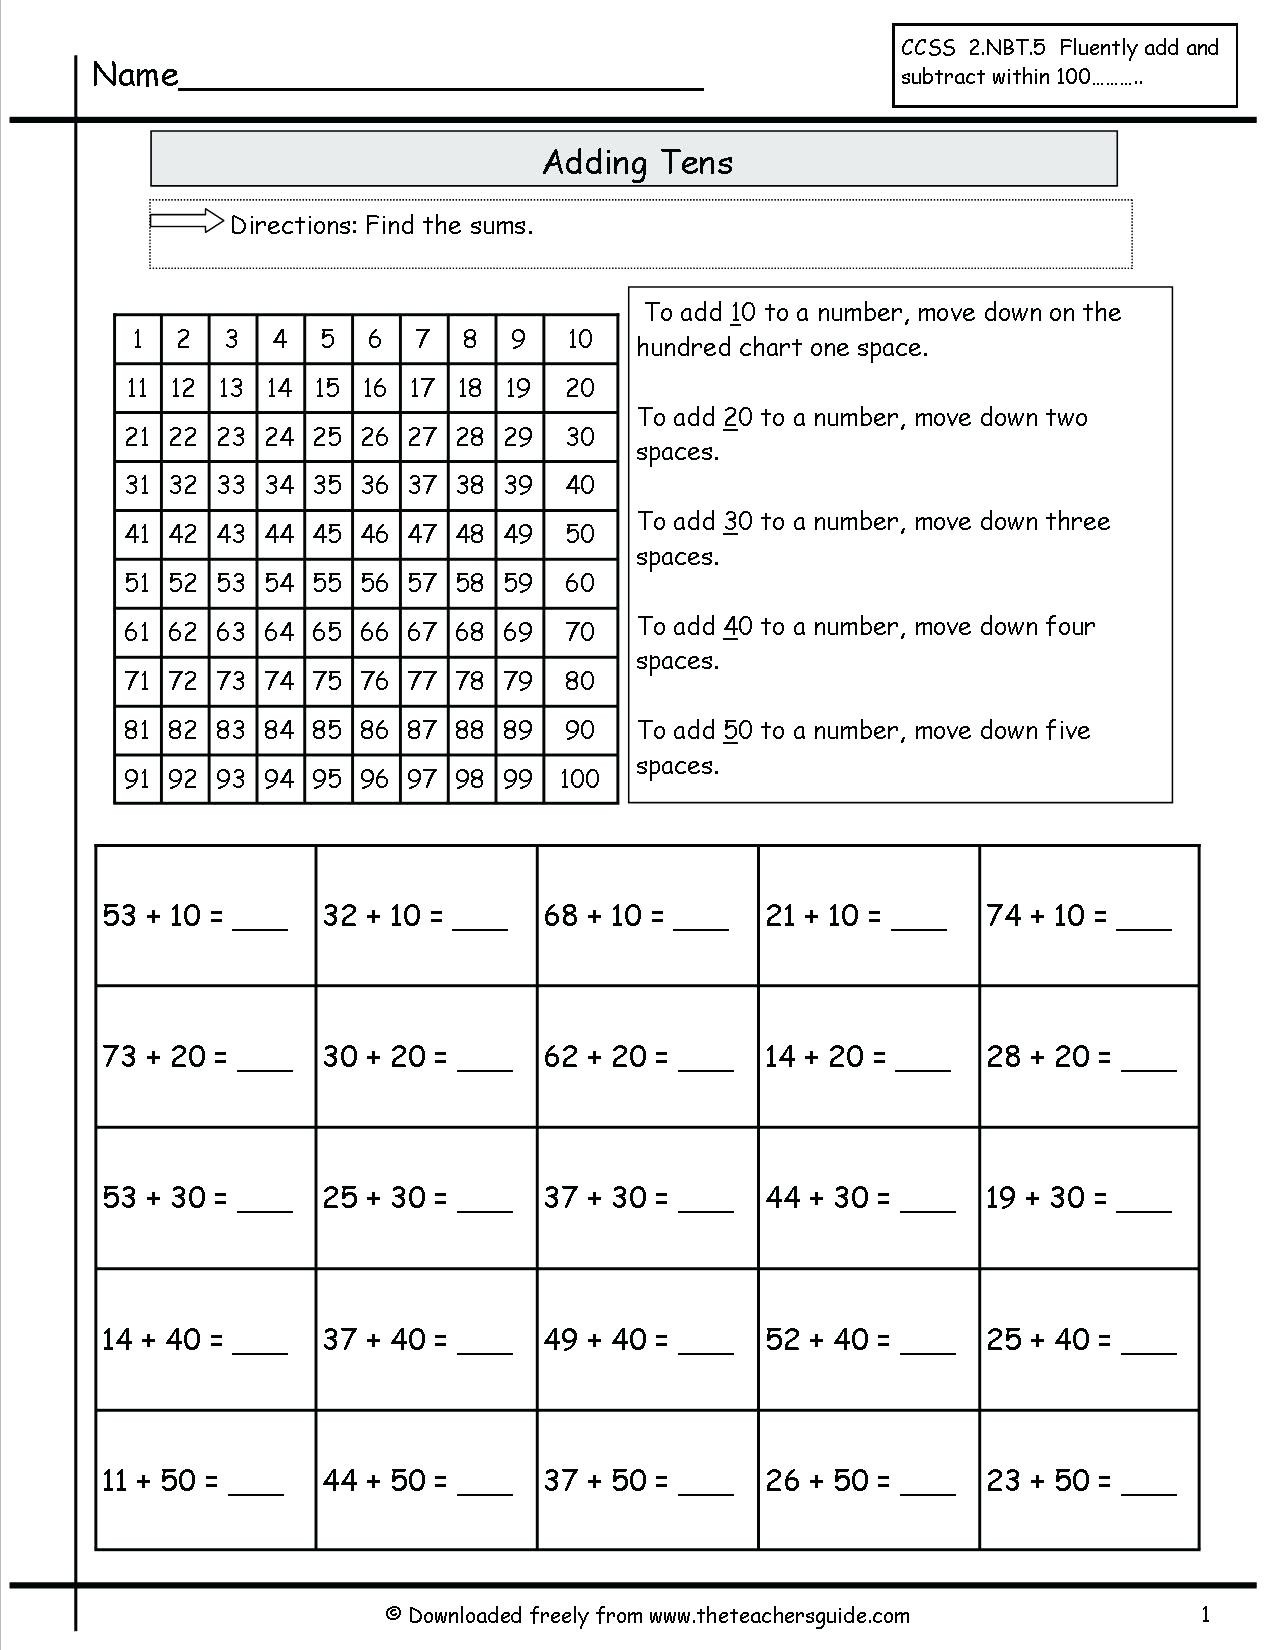 Free Math Worksheets Second Grade 2 Addition Add 3 Digit Numbers In Columns with Regrouping